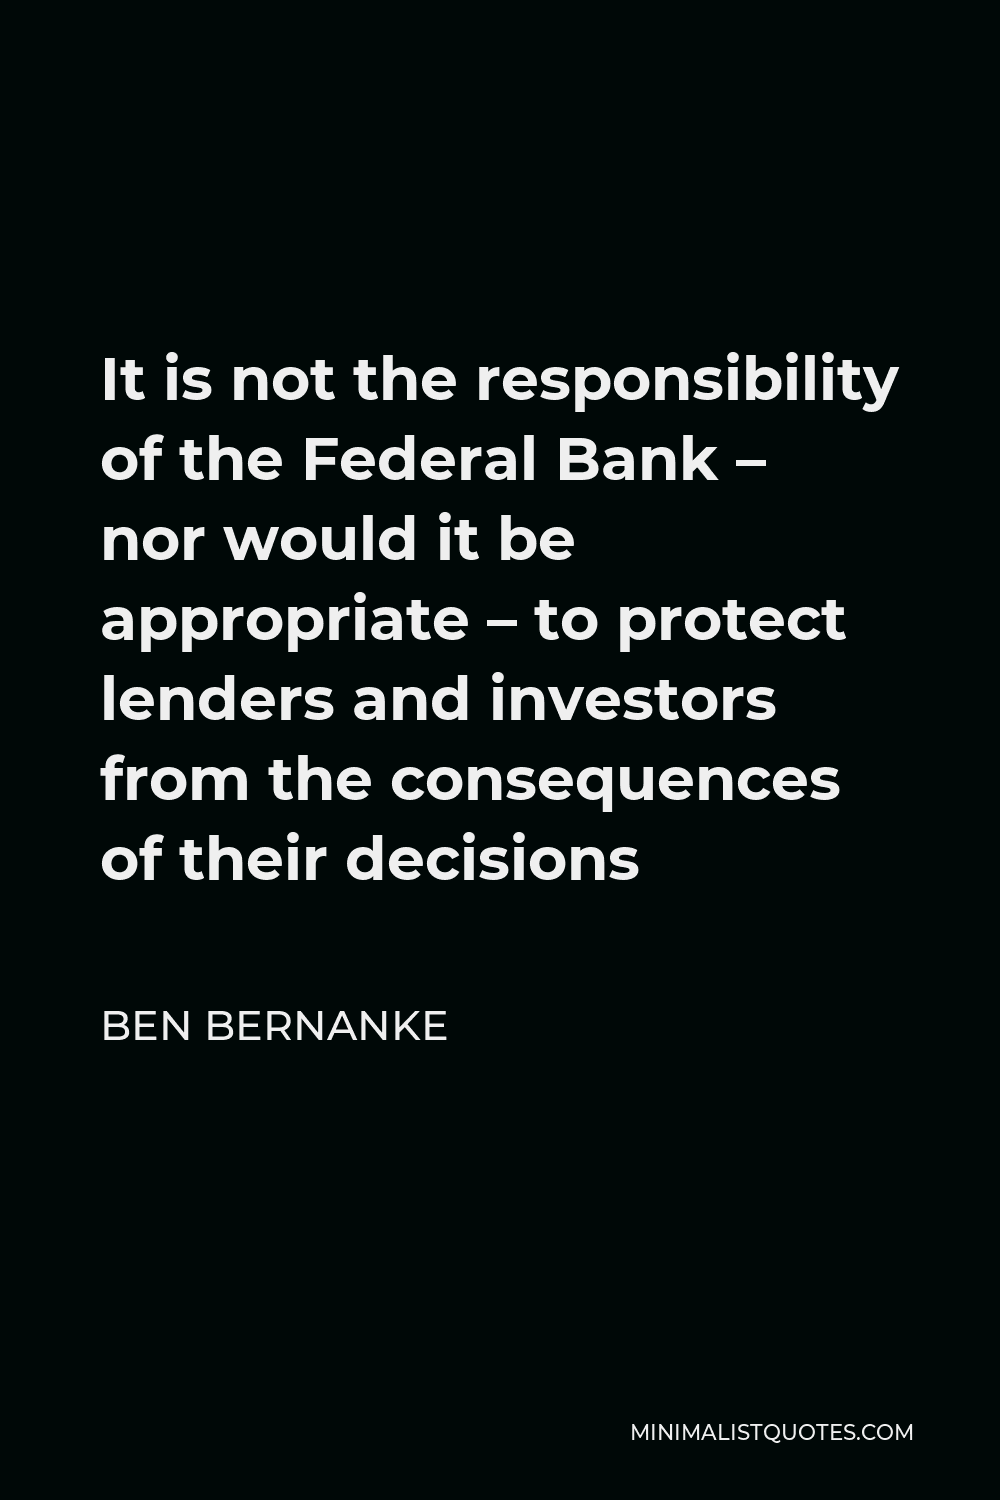 Ben Bernanke Quote - It is not the responsibility of the Federal Bank – nor would it be appropriate – to protect lenders and investors from the consequences of their decisions